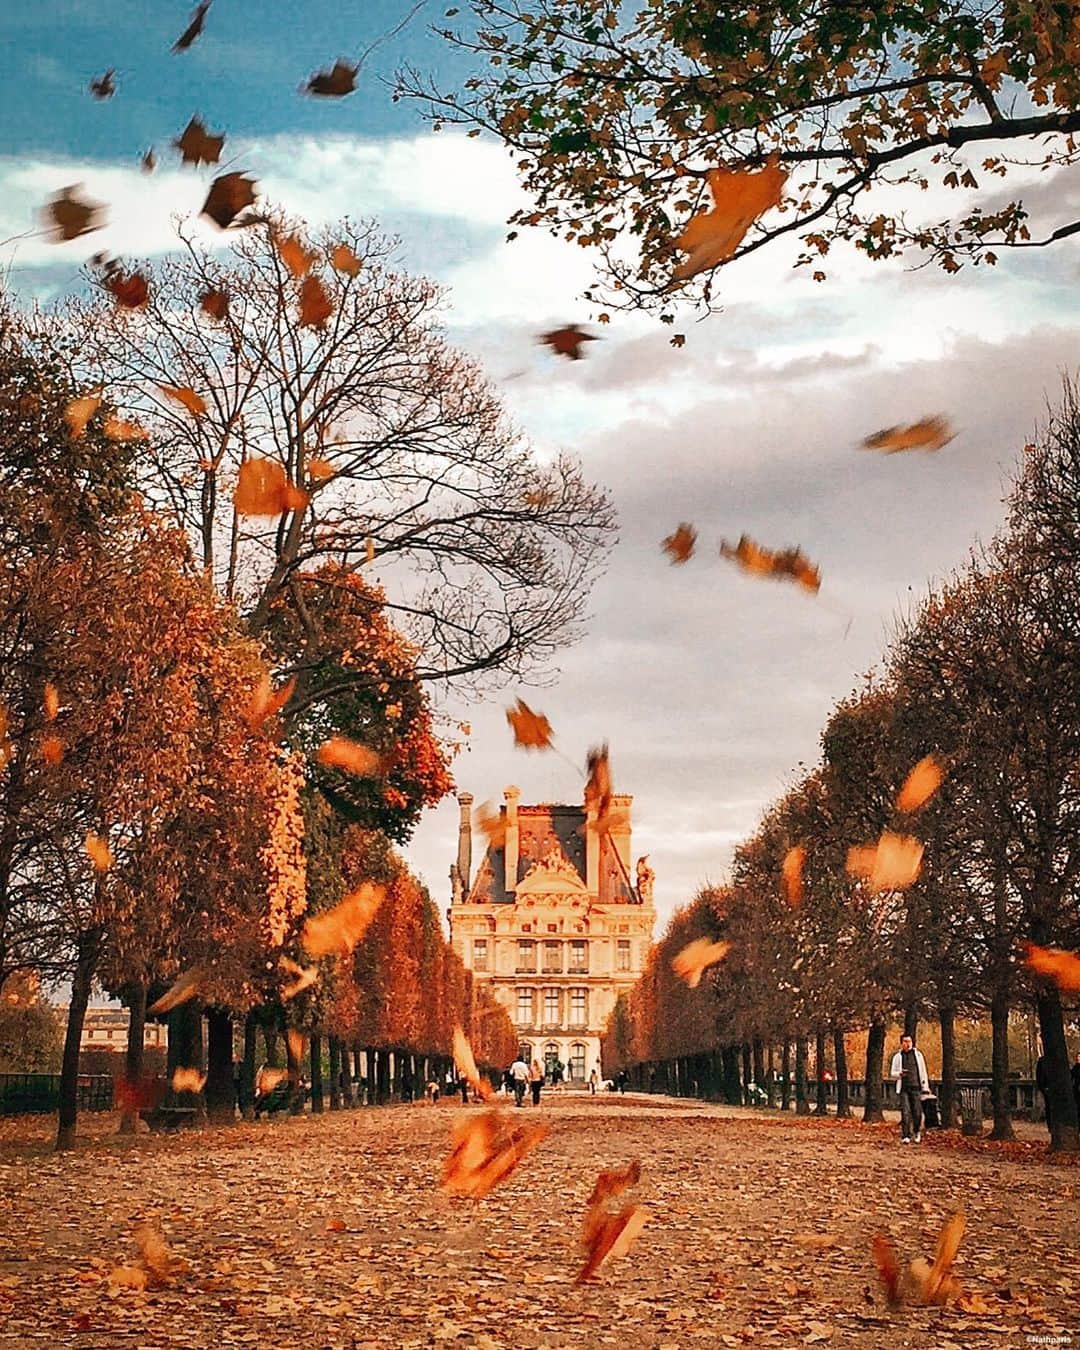 nathparisのインスタグラム：「AUTUMN COLORS 🍂🍁🍂 . Bon week-end à tous pour ce premier week-end de reconfinement, prenez soin de vous 💛 . Good weekend everyone for this first reconfinement weekend, take care and stay safe 💛」